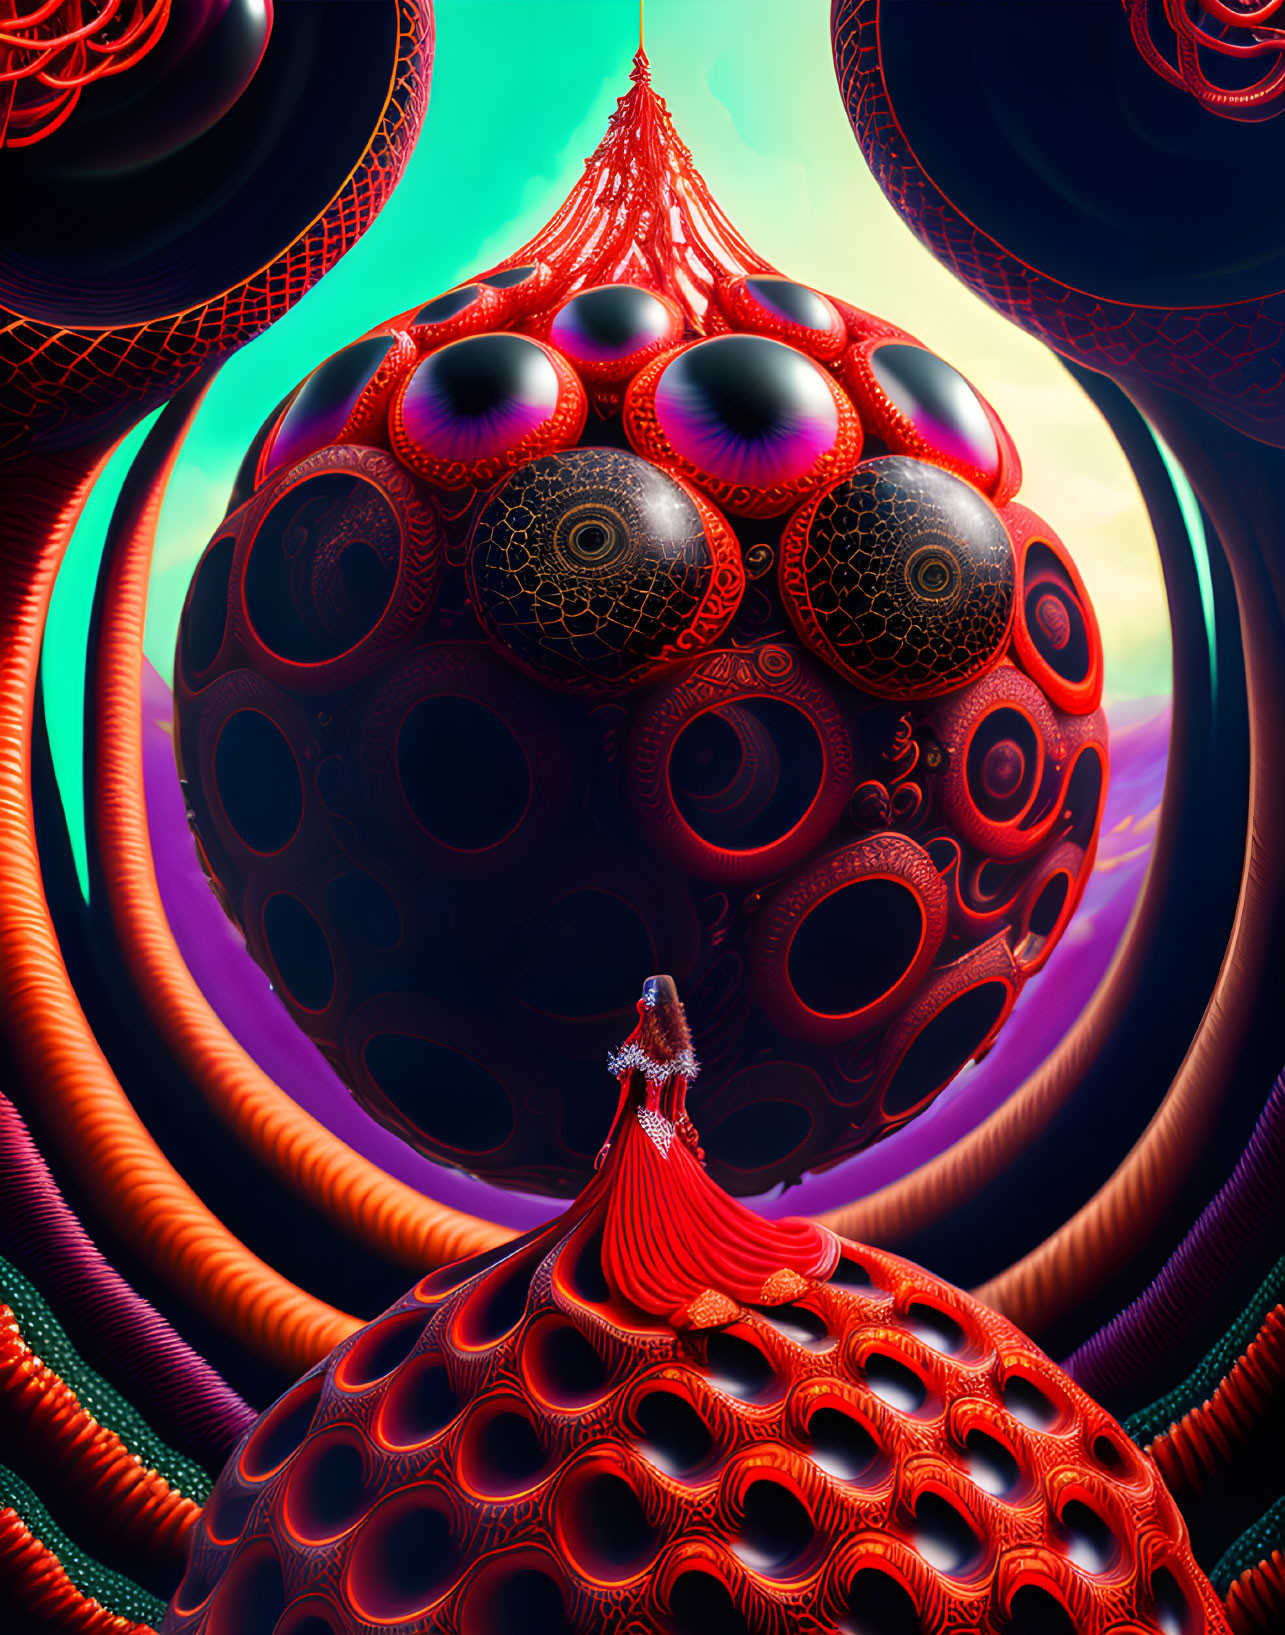 Surreal landscape digital art: person in red dress on ornate orb, towering spire,